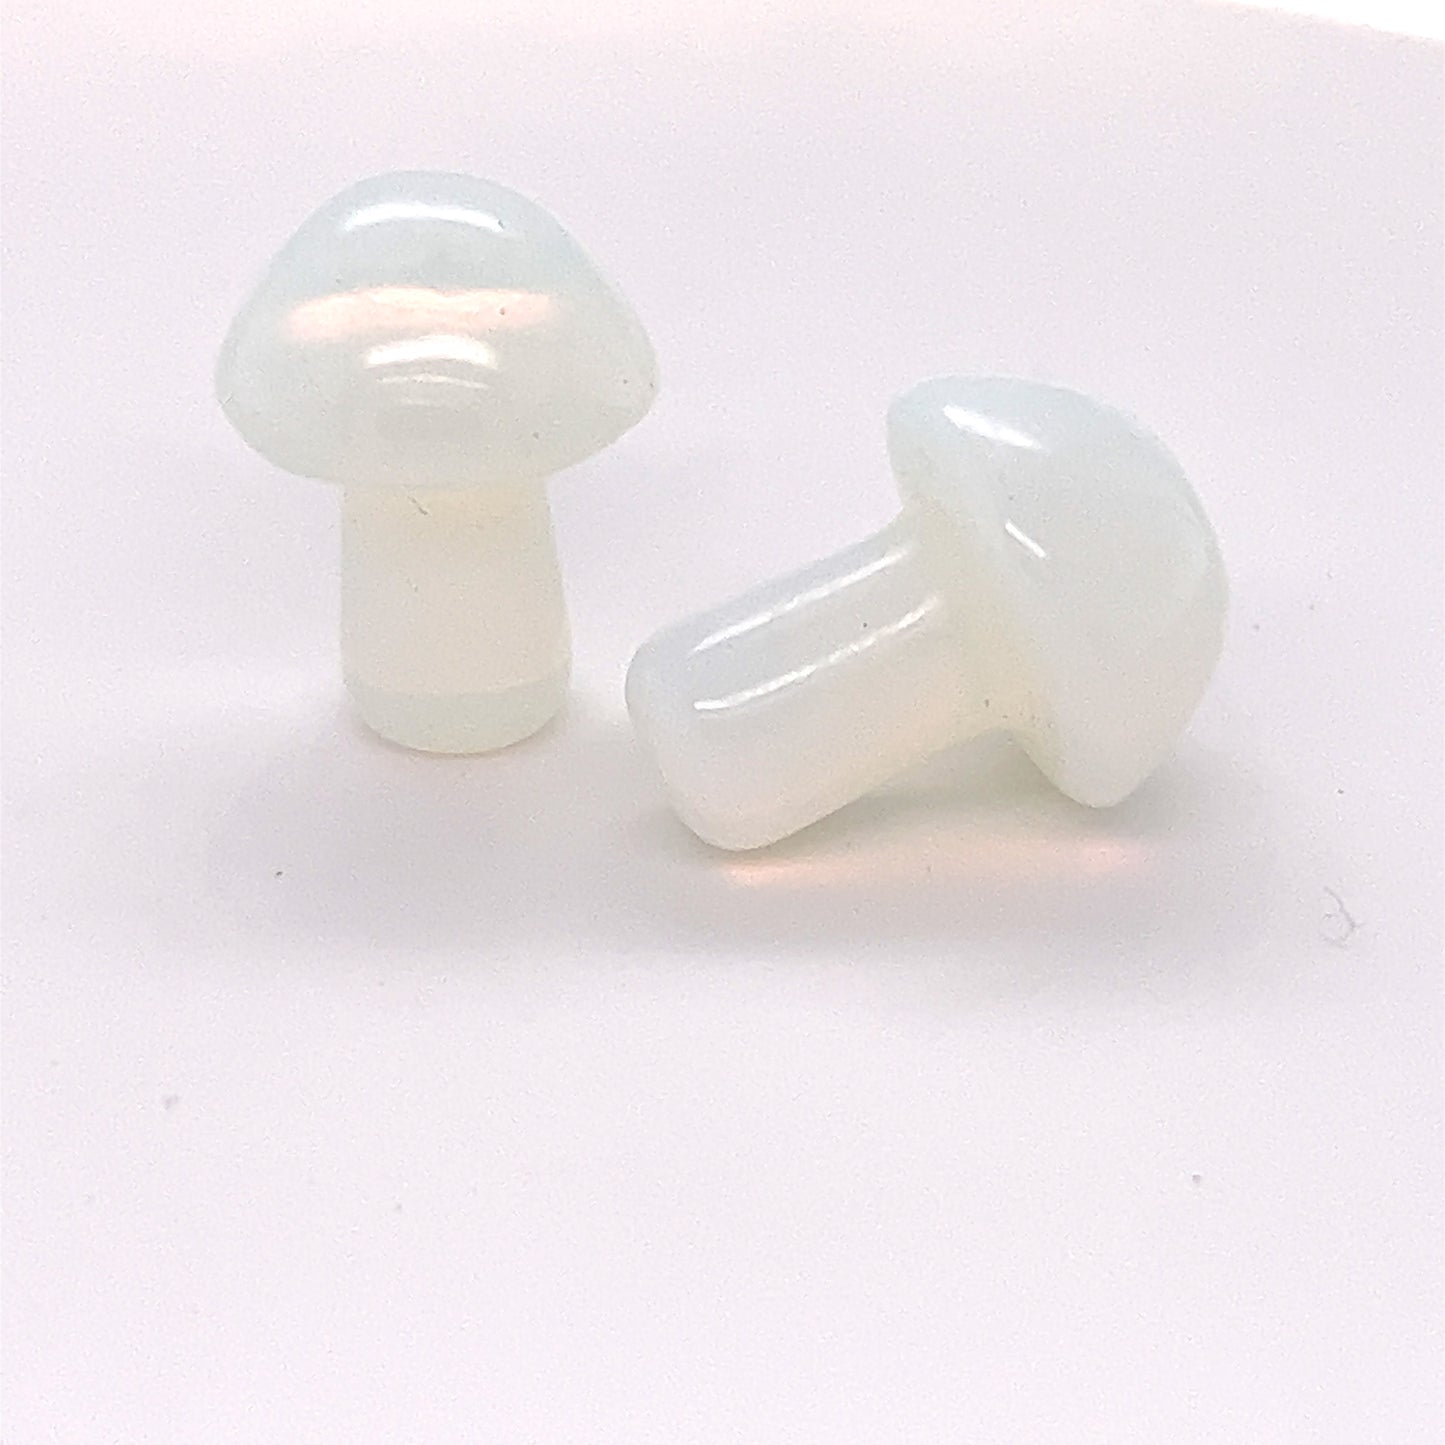 
                  
                    Two Super Silver Opalite Stone Mushroom plugs on a white surface.
                  
                